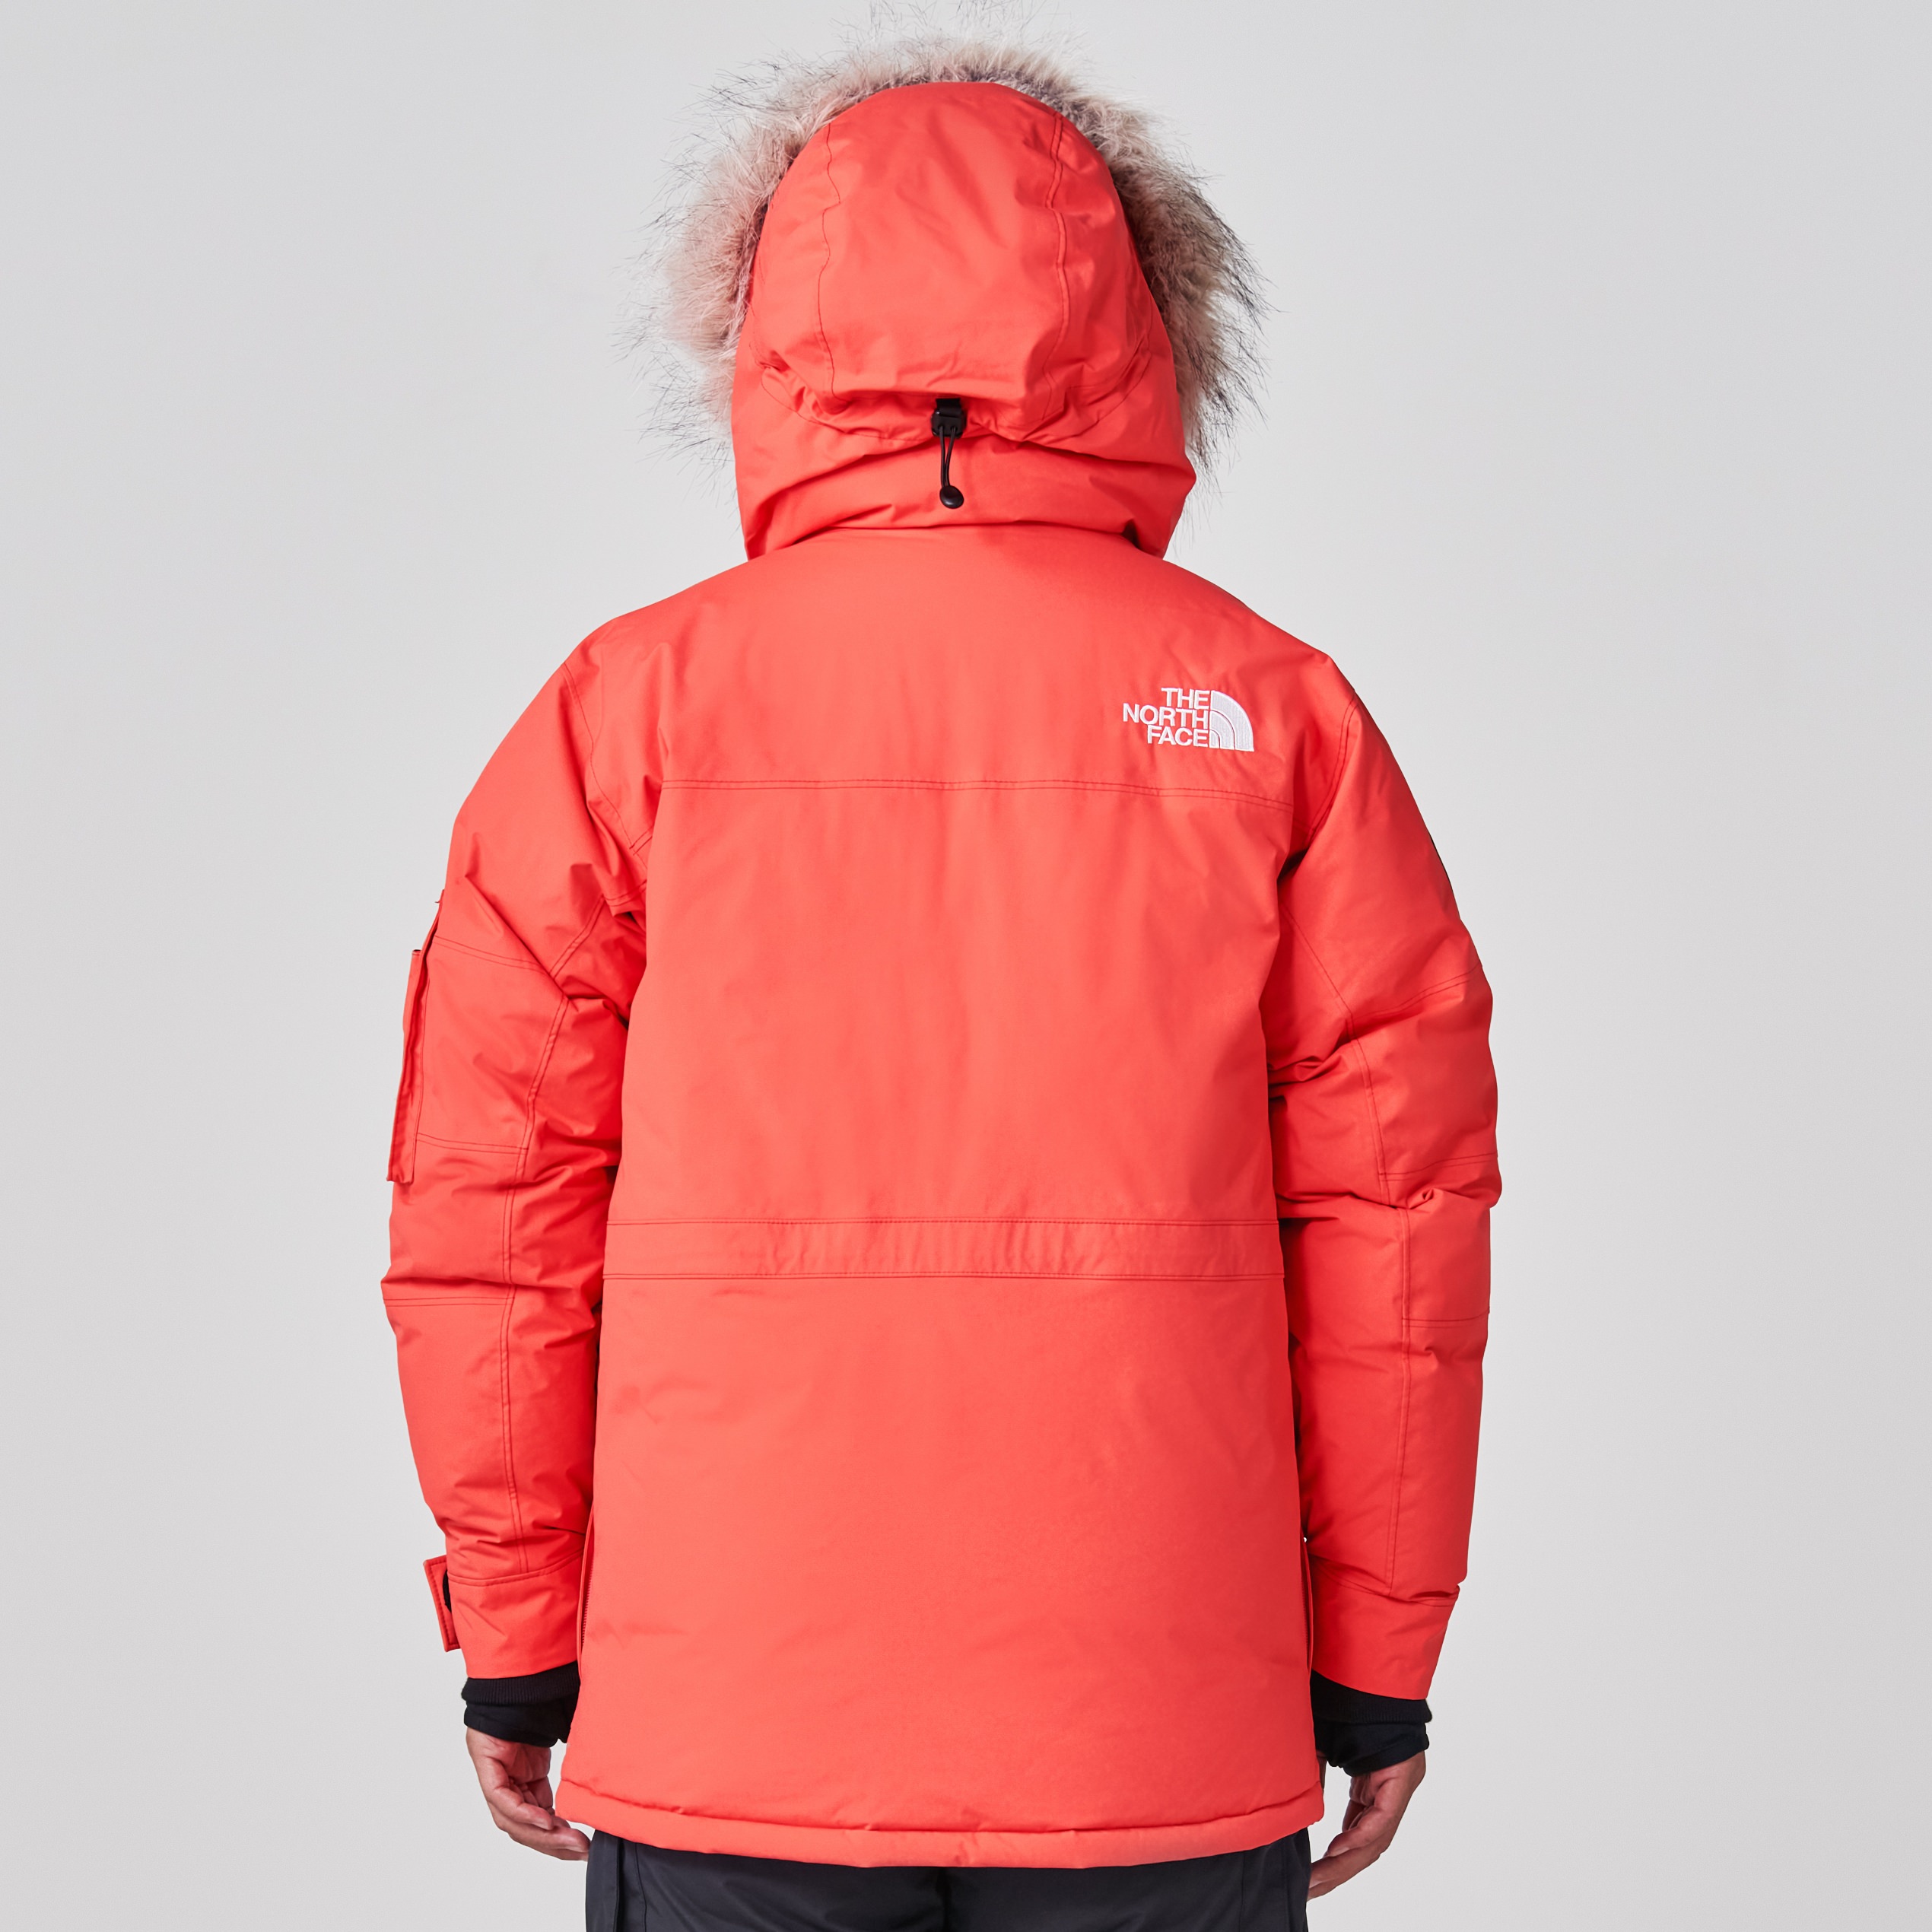 THE NORTH FACE◇SOUTHERN CROSS PARKA_サザンクロスパーカ/S/ナイロン